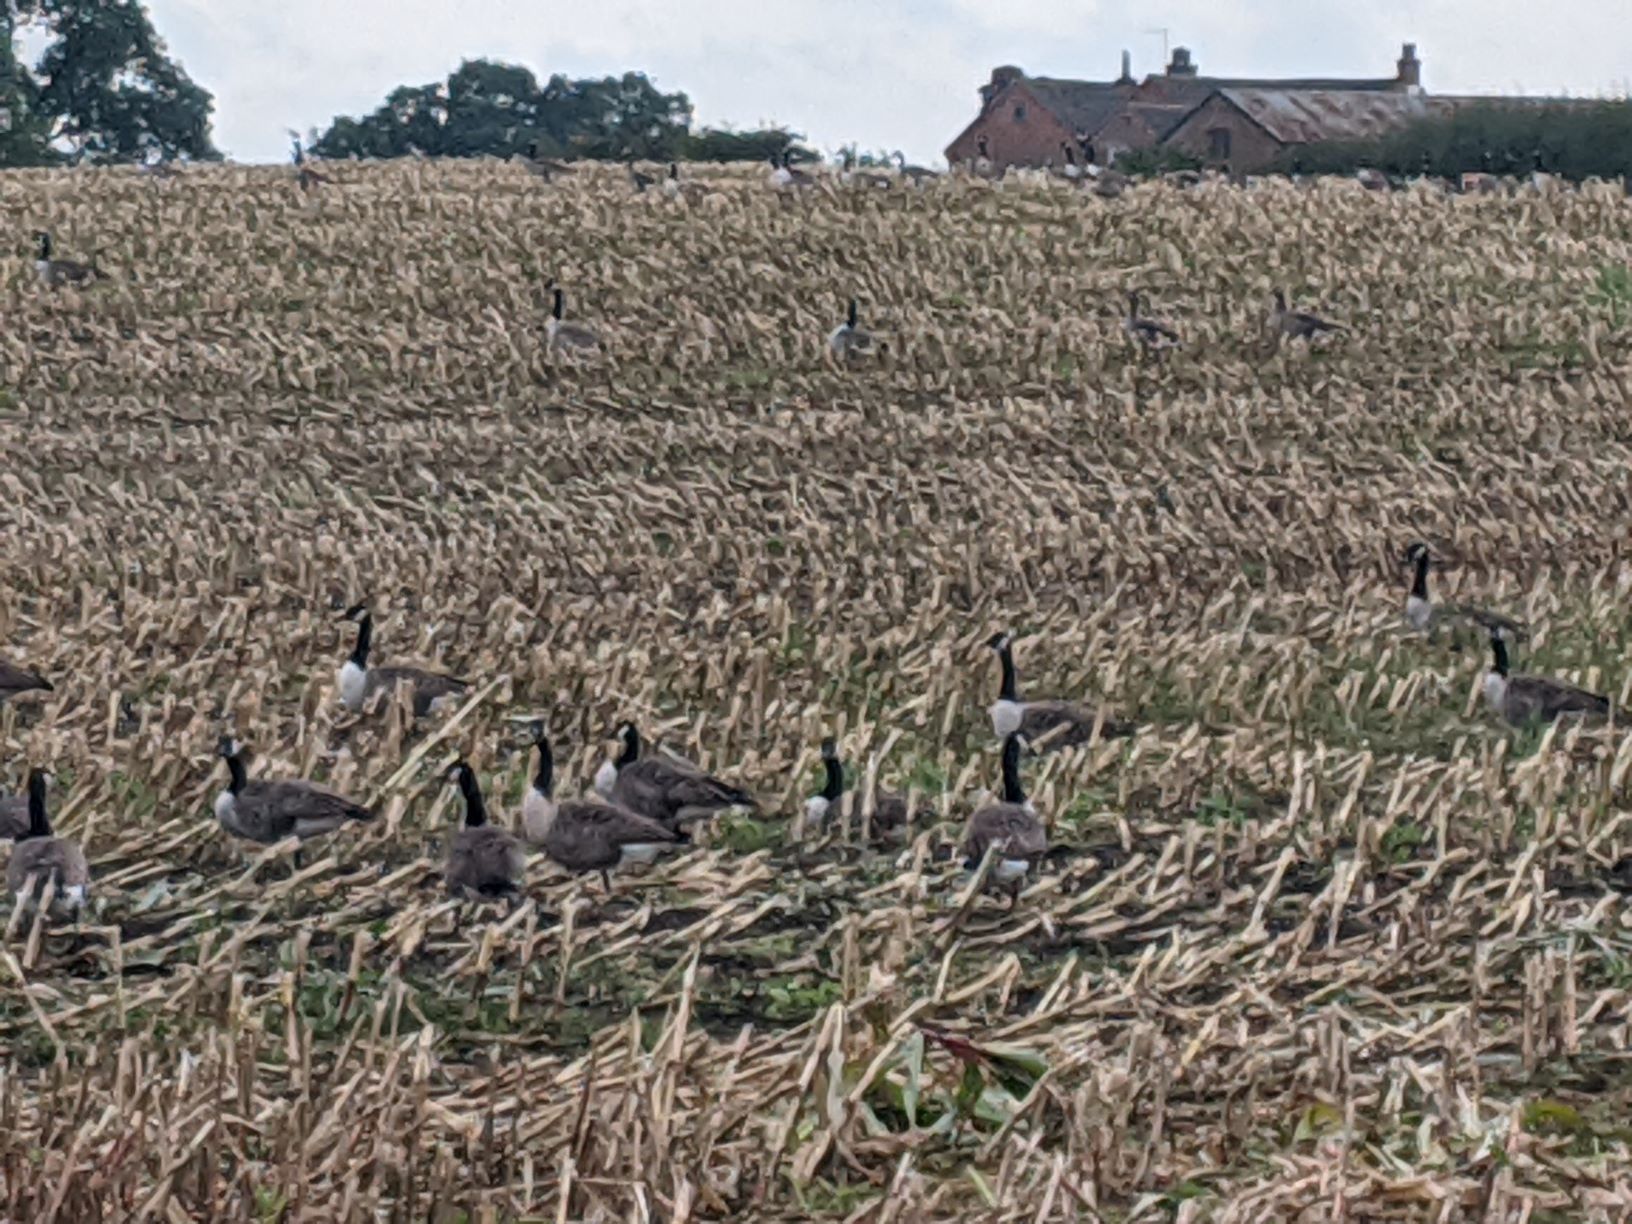 Canada Geese grazing in the maize stubble, October 2nd 2020